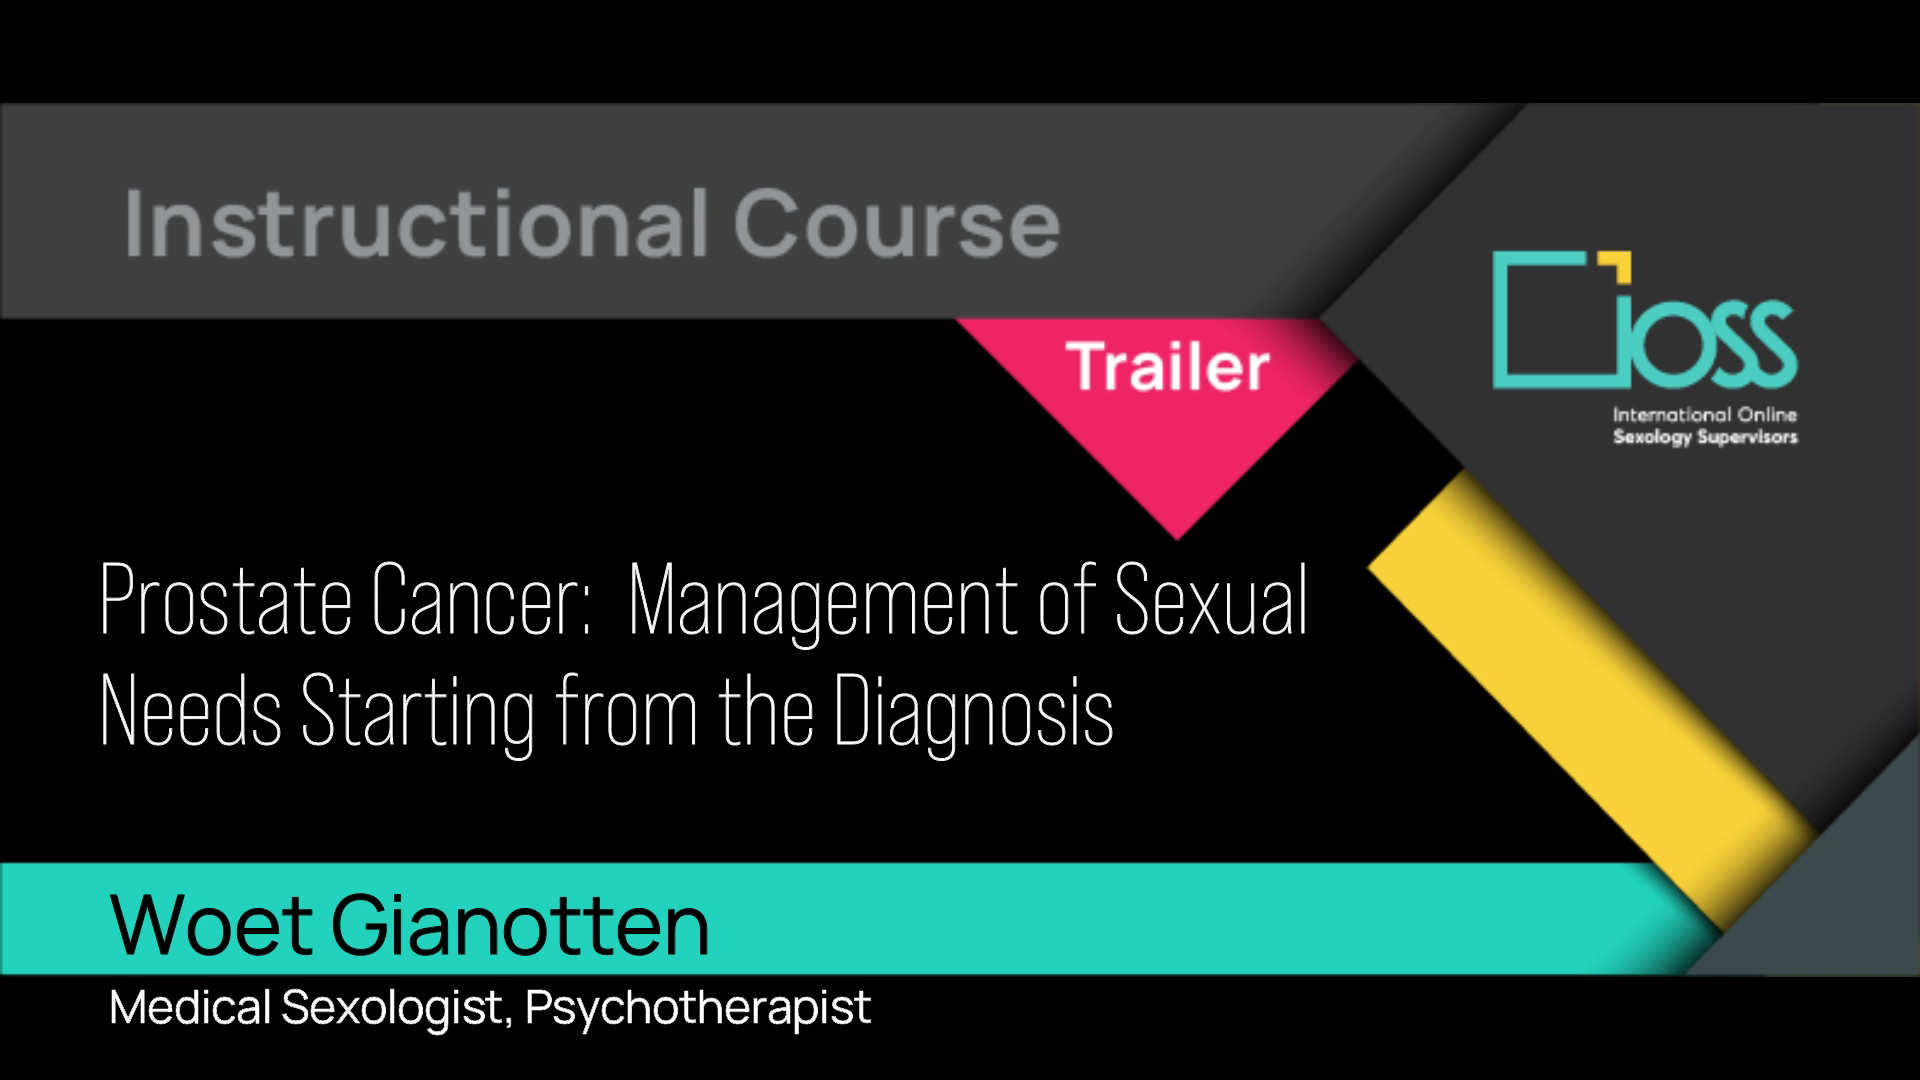 Trailer Prostate Cancer: Management of Sexual Needs Starting from the Diagnosis (Part 1 & 2)